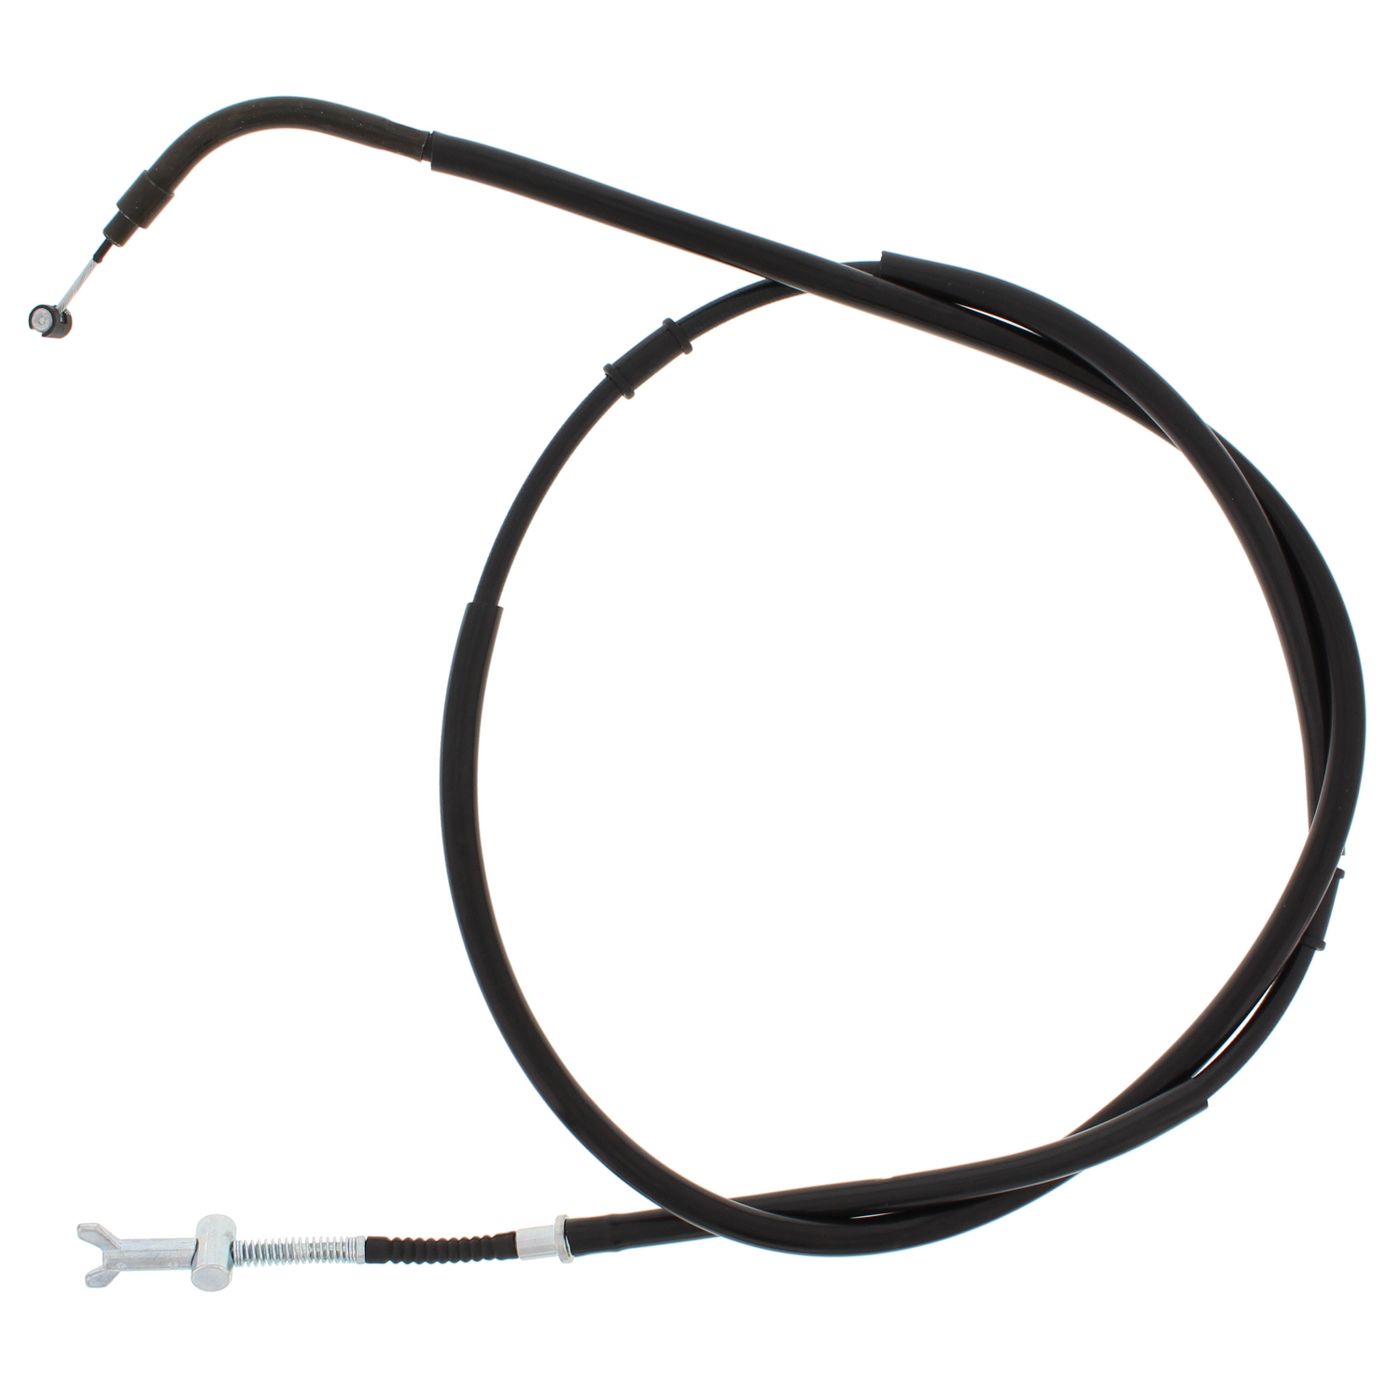 Wrp Brake Cables - WRP454047 image